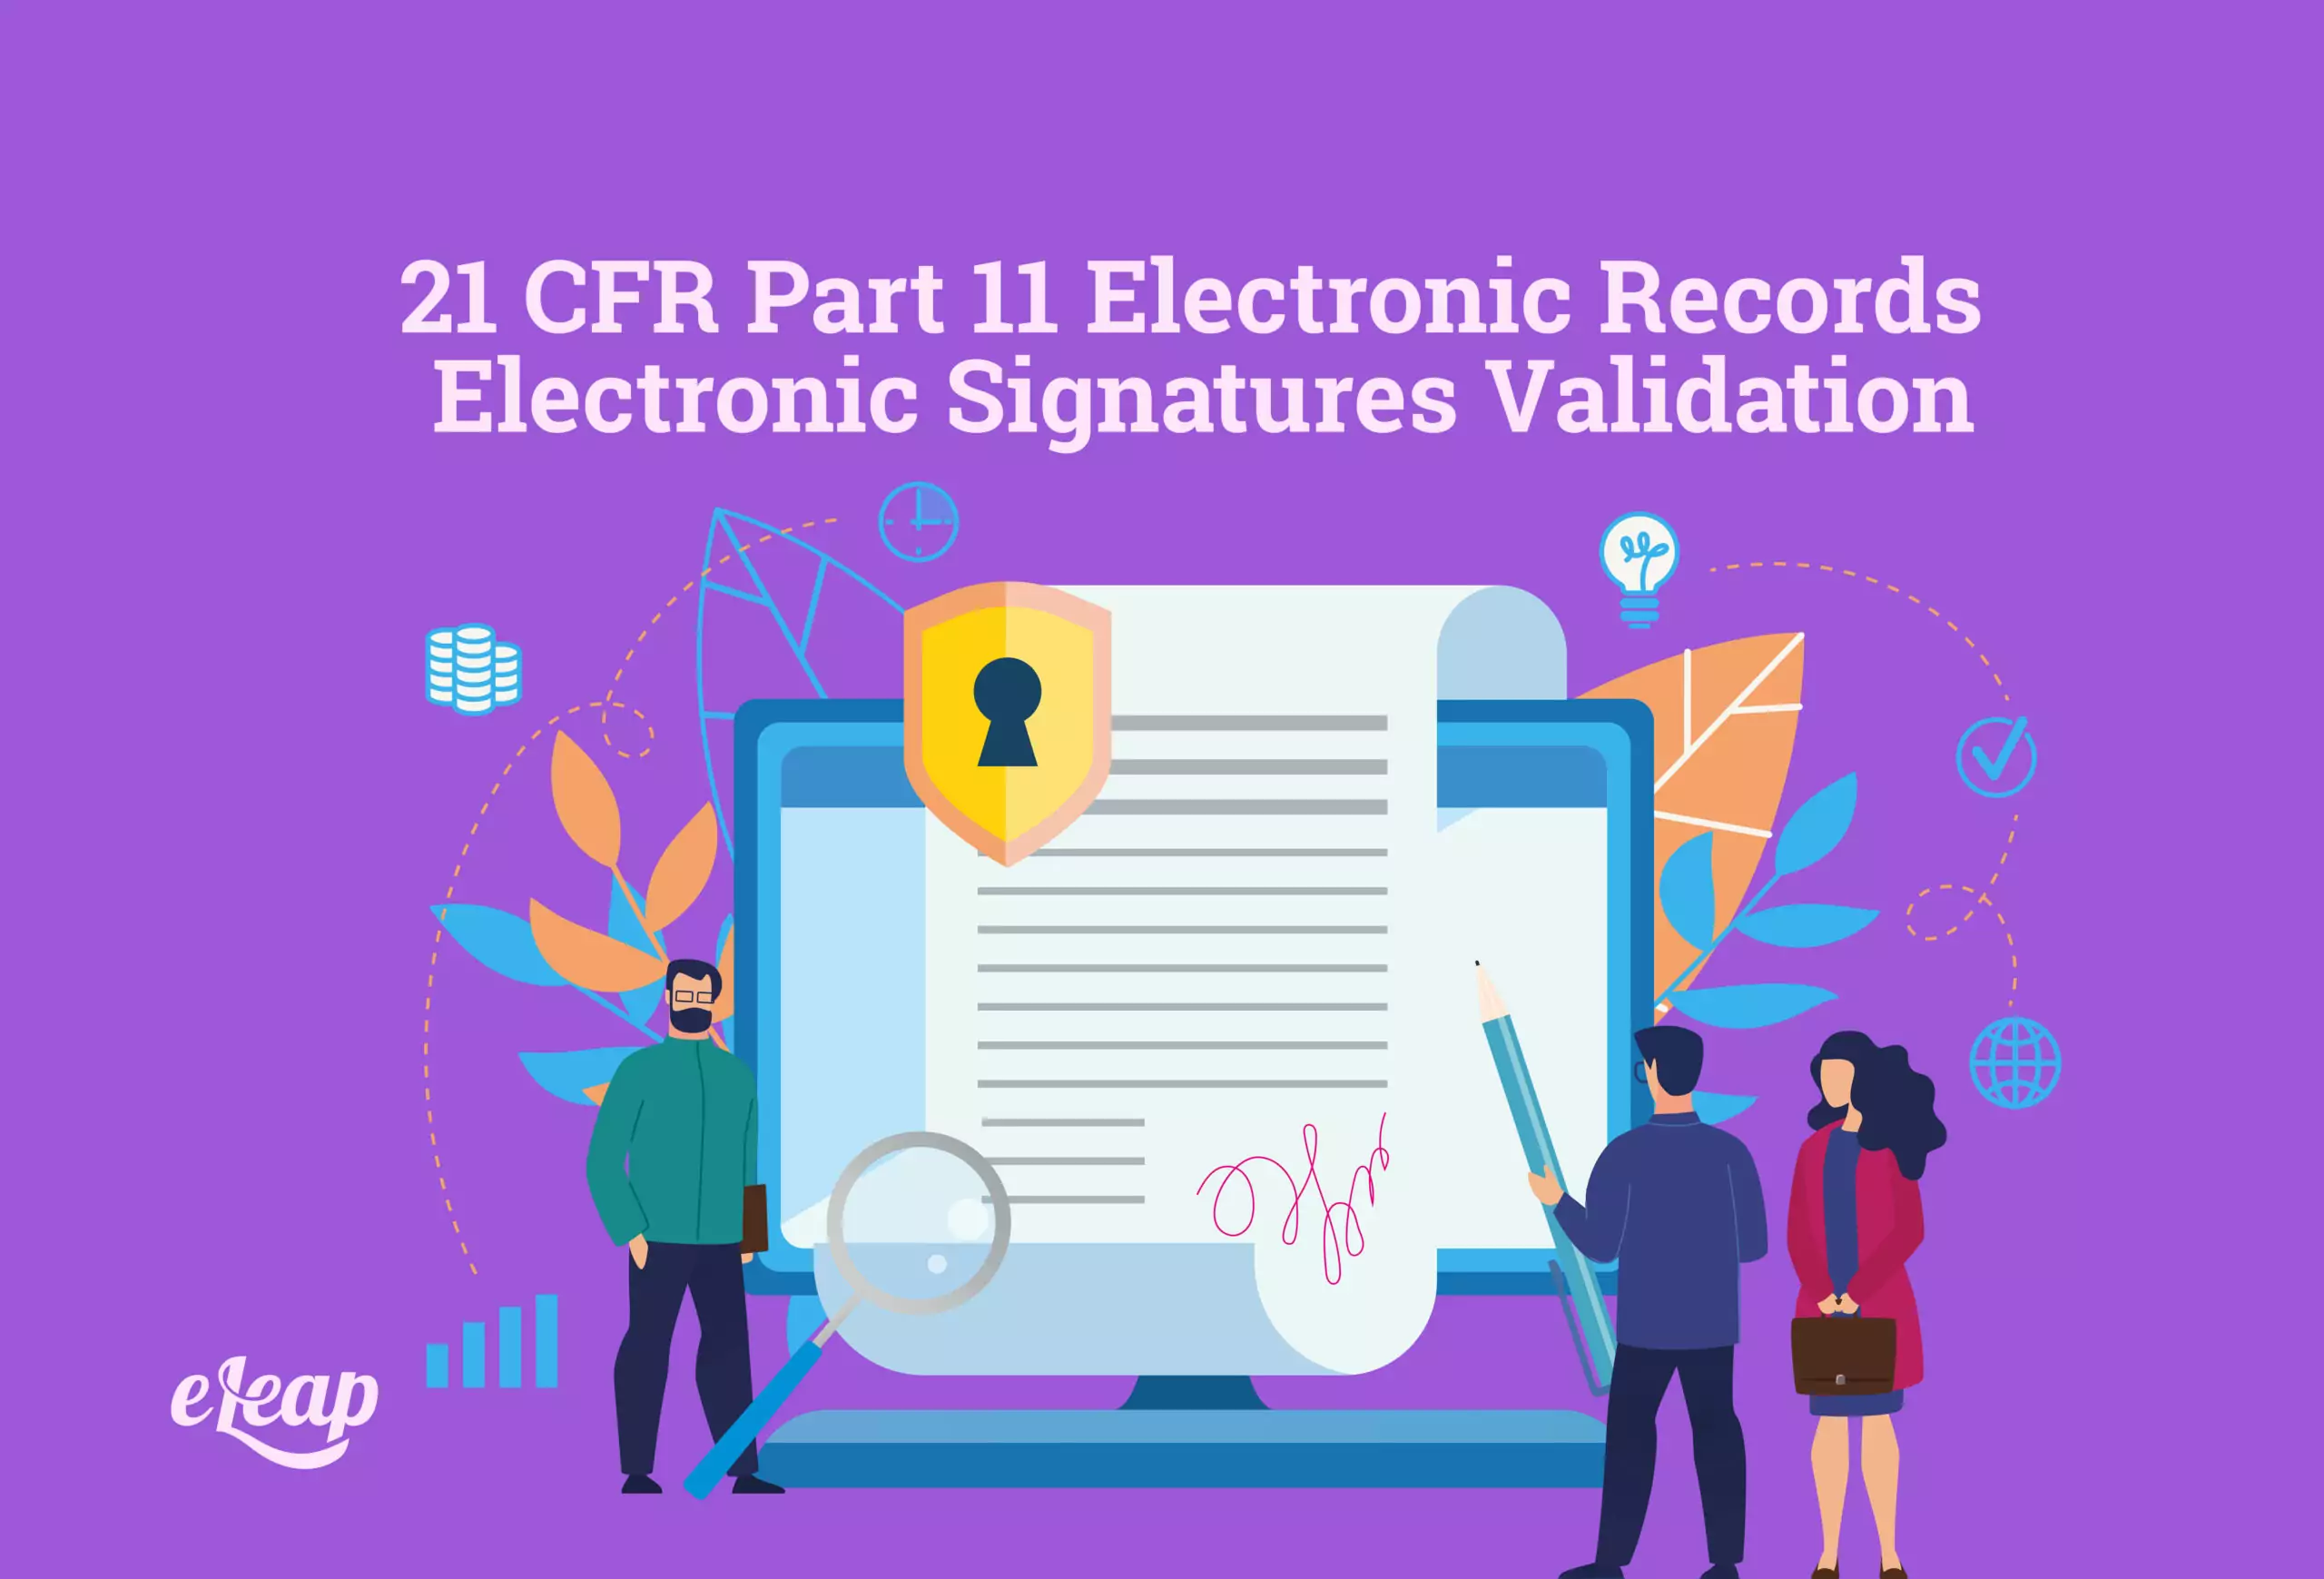 21 CFR Part 11 Electronic Records Electronic Signatures Validation